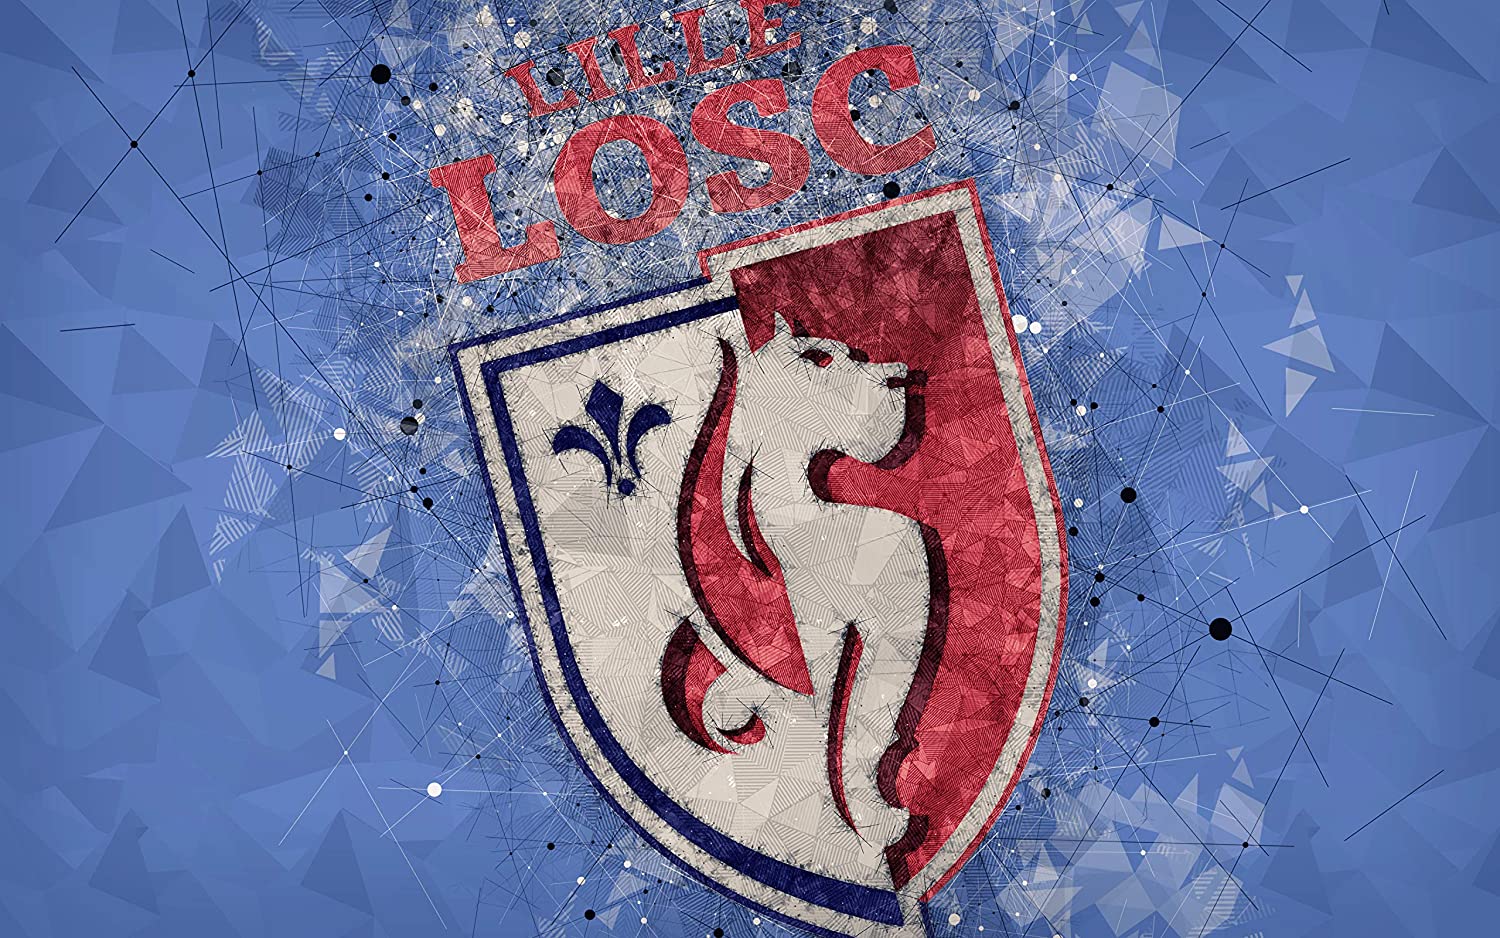 FC Lille LOSC Poster, FC Lille LOSC Football Print, Football Wall Poster, Football Wall Print, Football Wall Art, Football Decor, Handmade Products